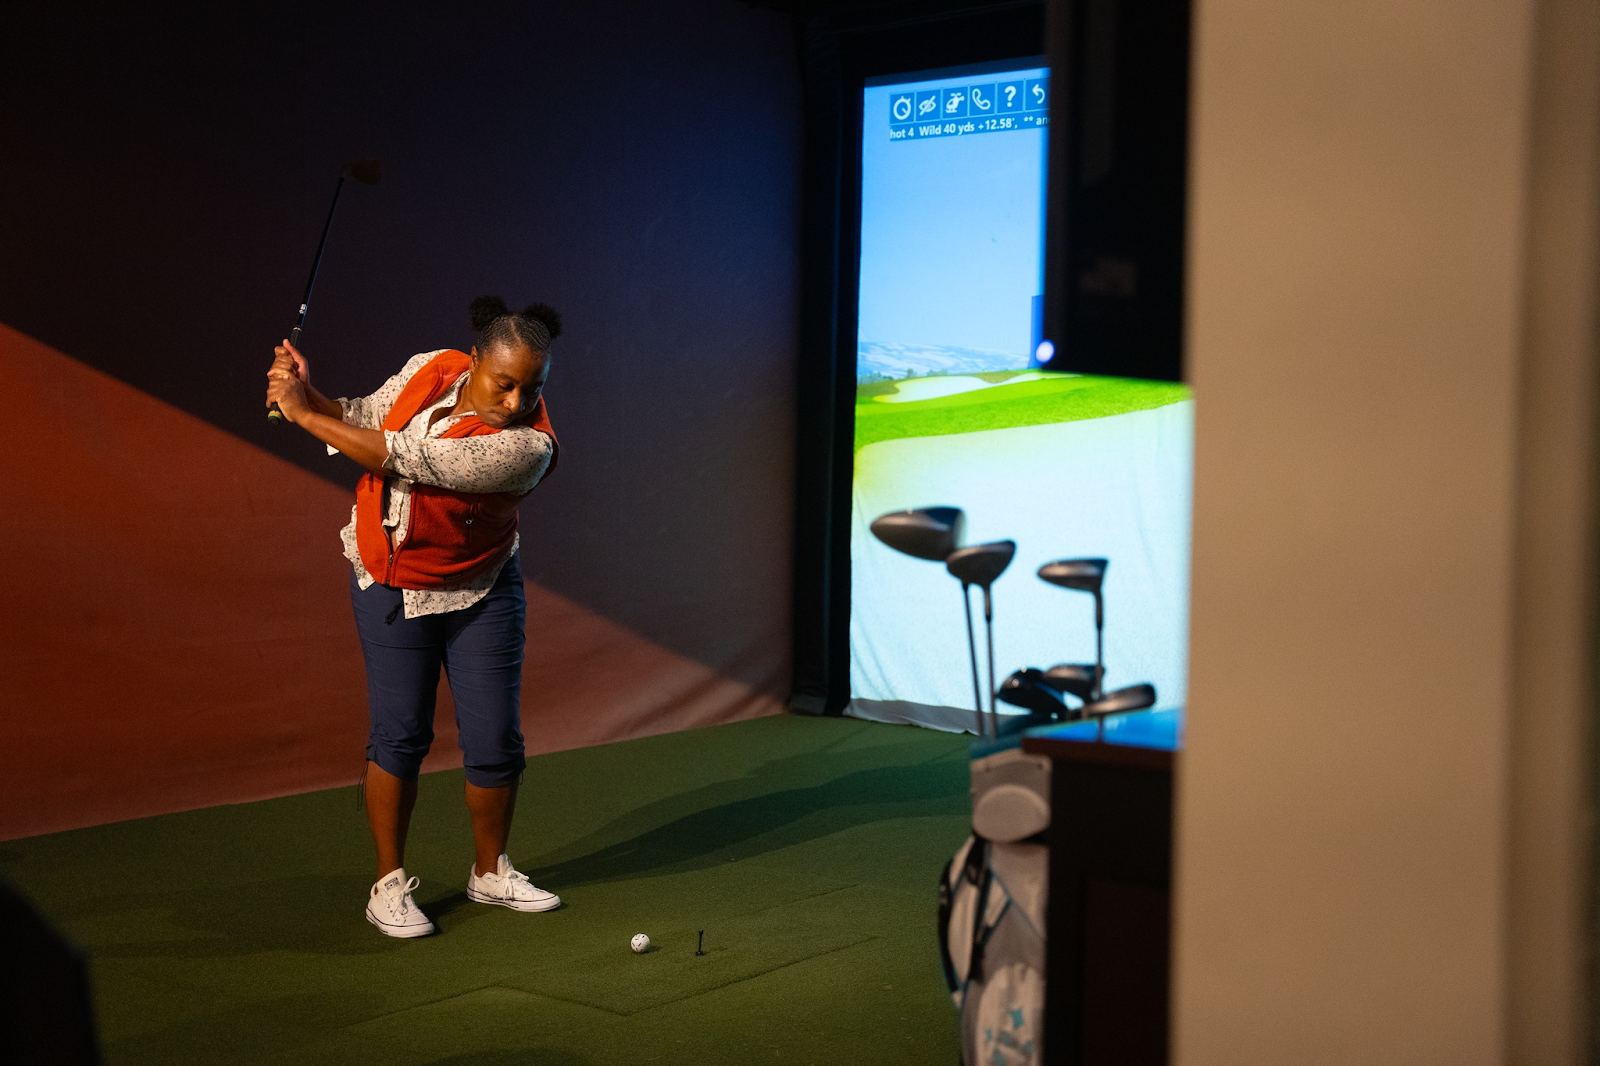 golf simulator malvern pa, malvern golf simulator, beginner golf lessons malvern pa, golf malvern pa, golf club, golf performance center, family fun, corporate america, driving range, main line, tic tac toe, unique opportunity, service, great option, sport, ability, balls, site, venue, games, screen, food, guests, played, kids, event, hours, fairways, philadelphia, parties, spring, winter, first time